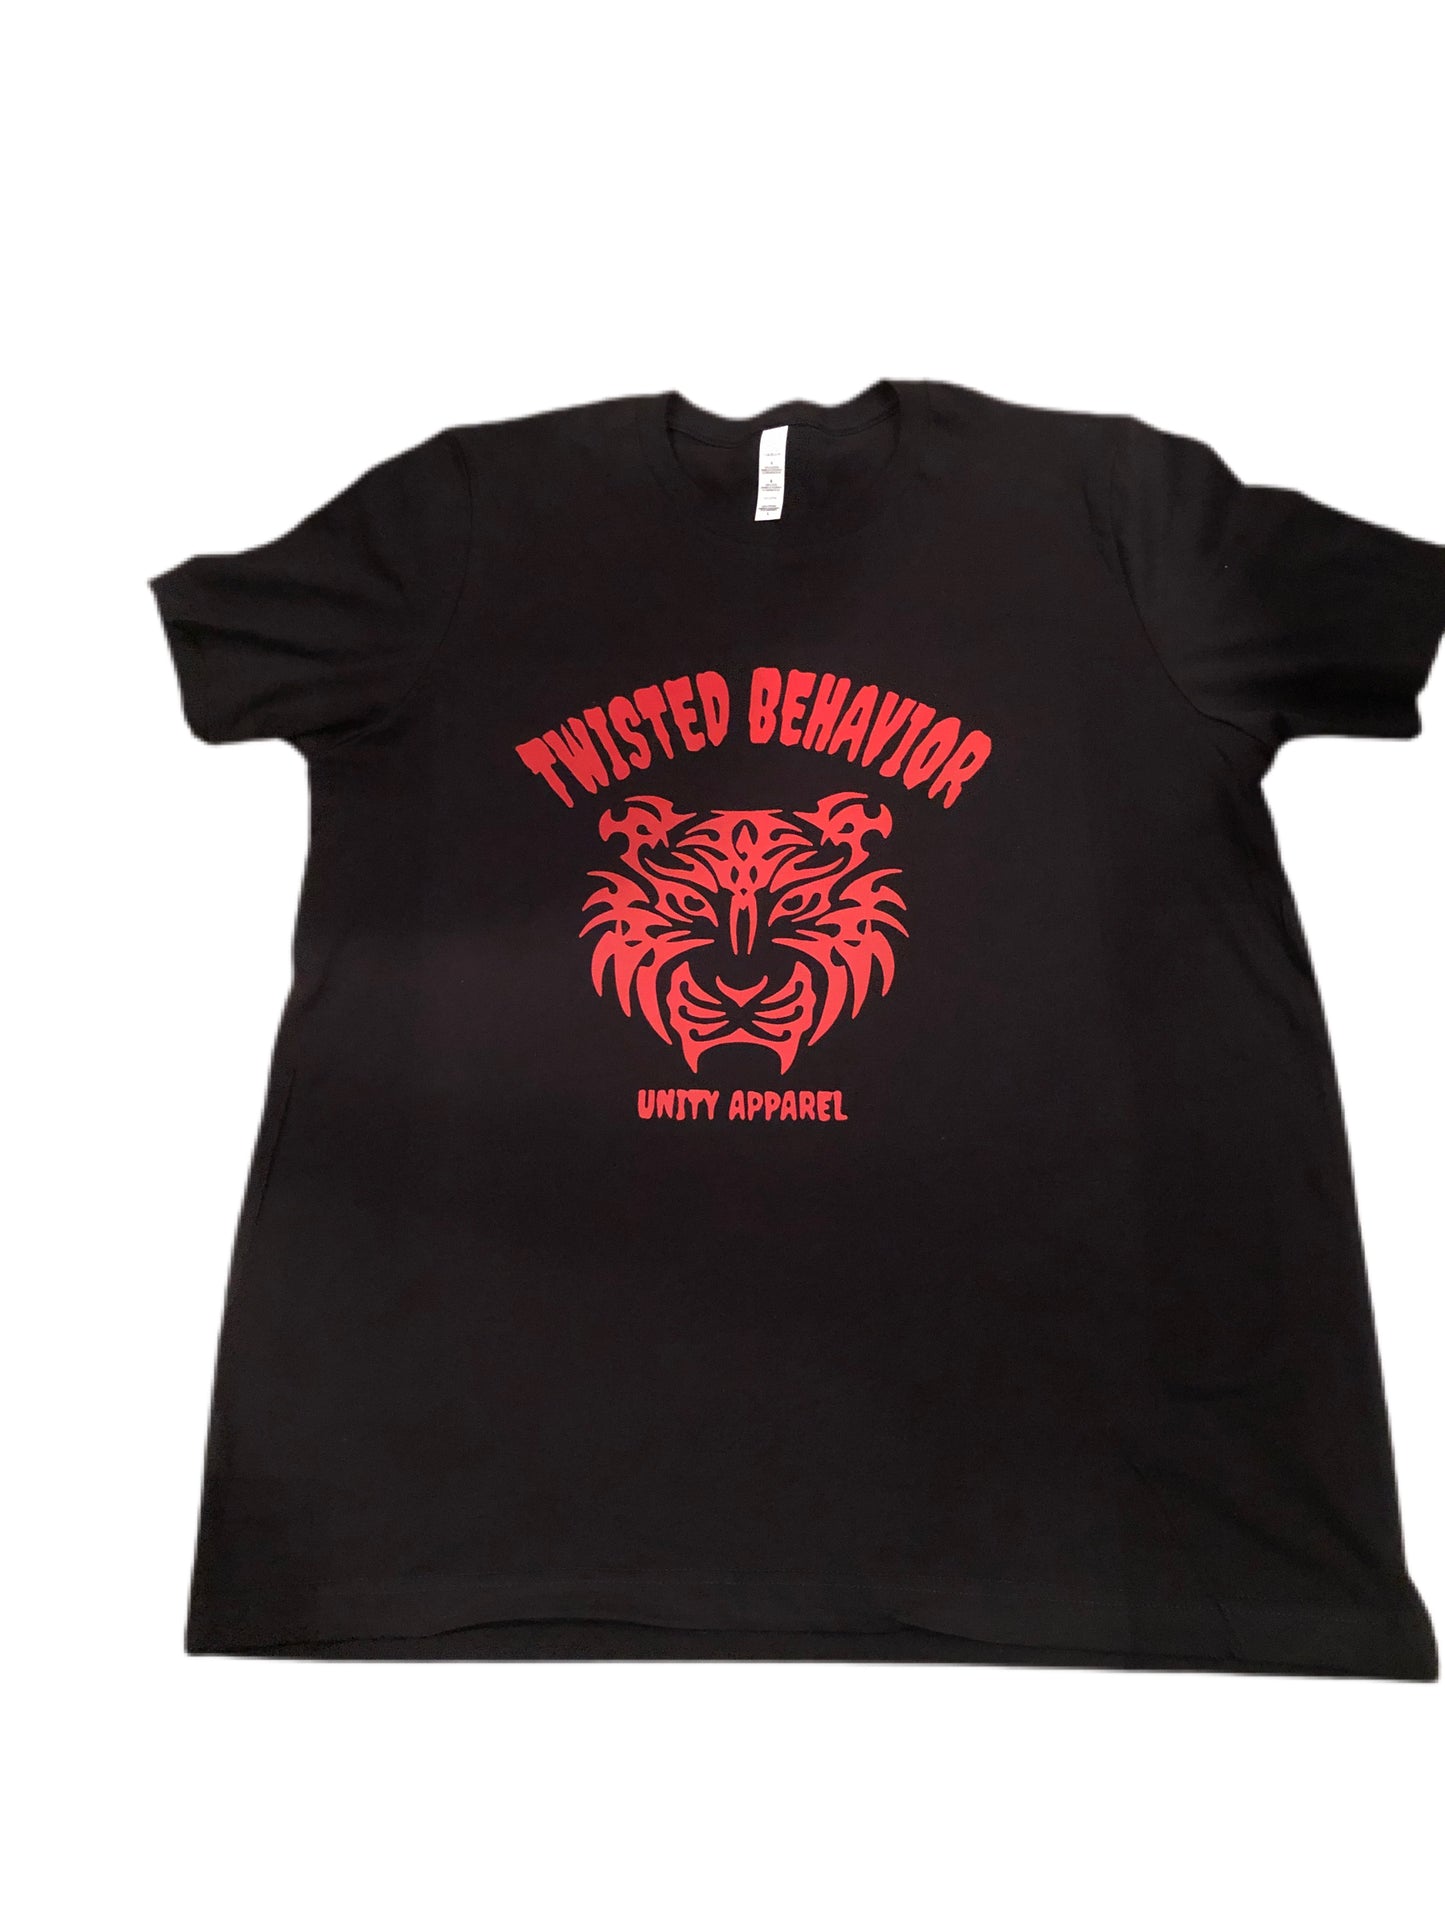 The Red Face Twisted Behavior T-Shirt